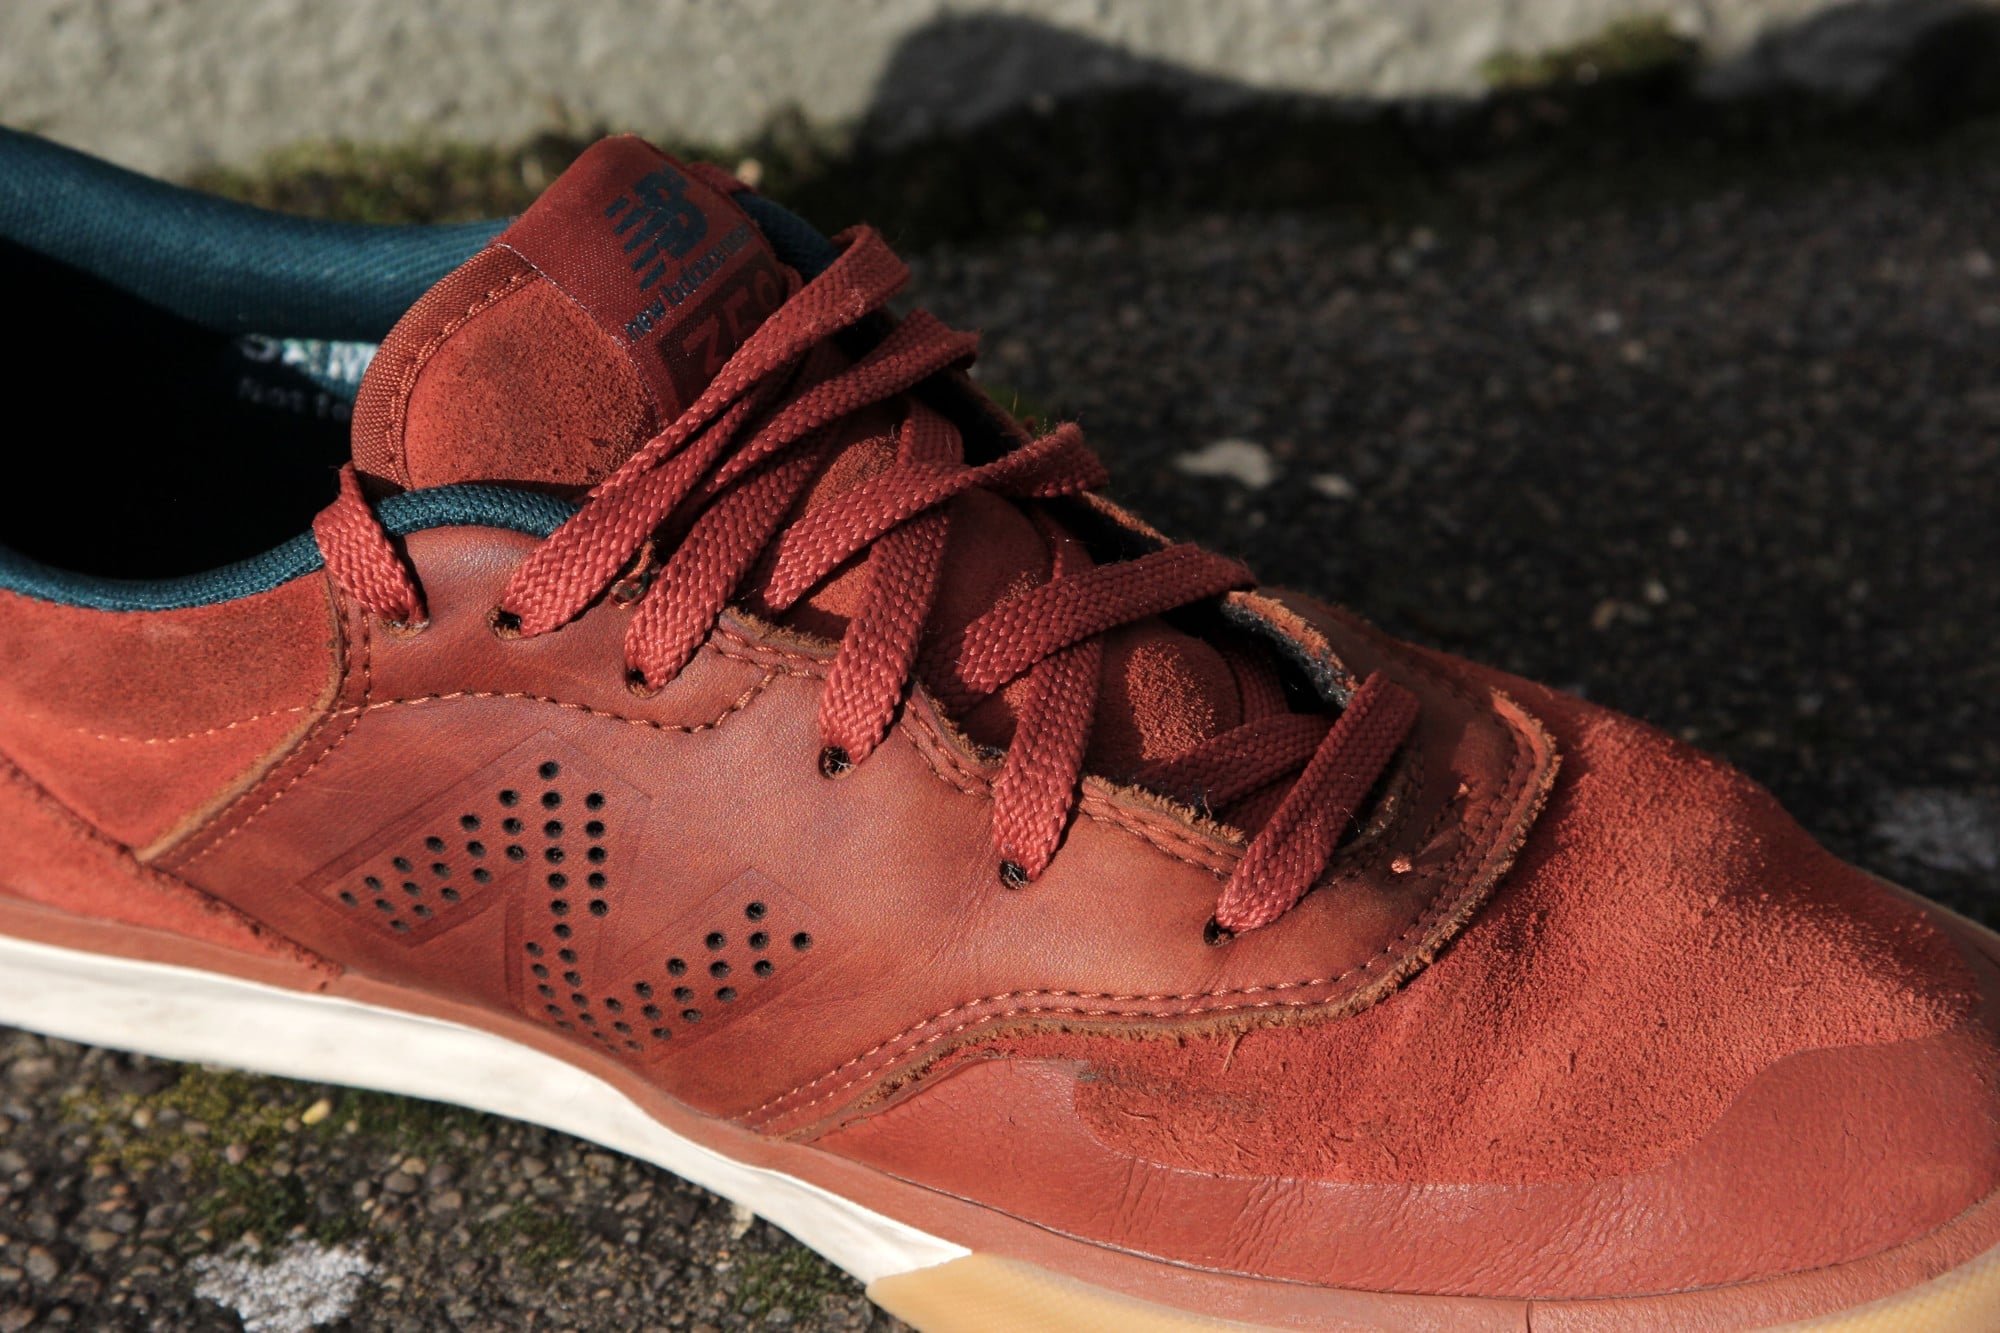 New Balance Arto 358 Skate Shoes Wear Test Review | Tactics